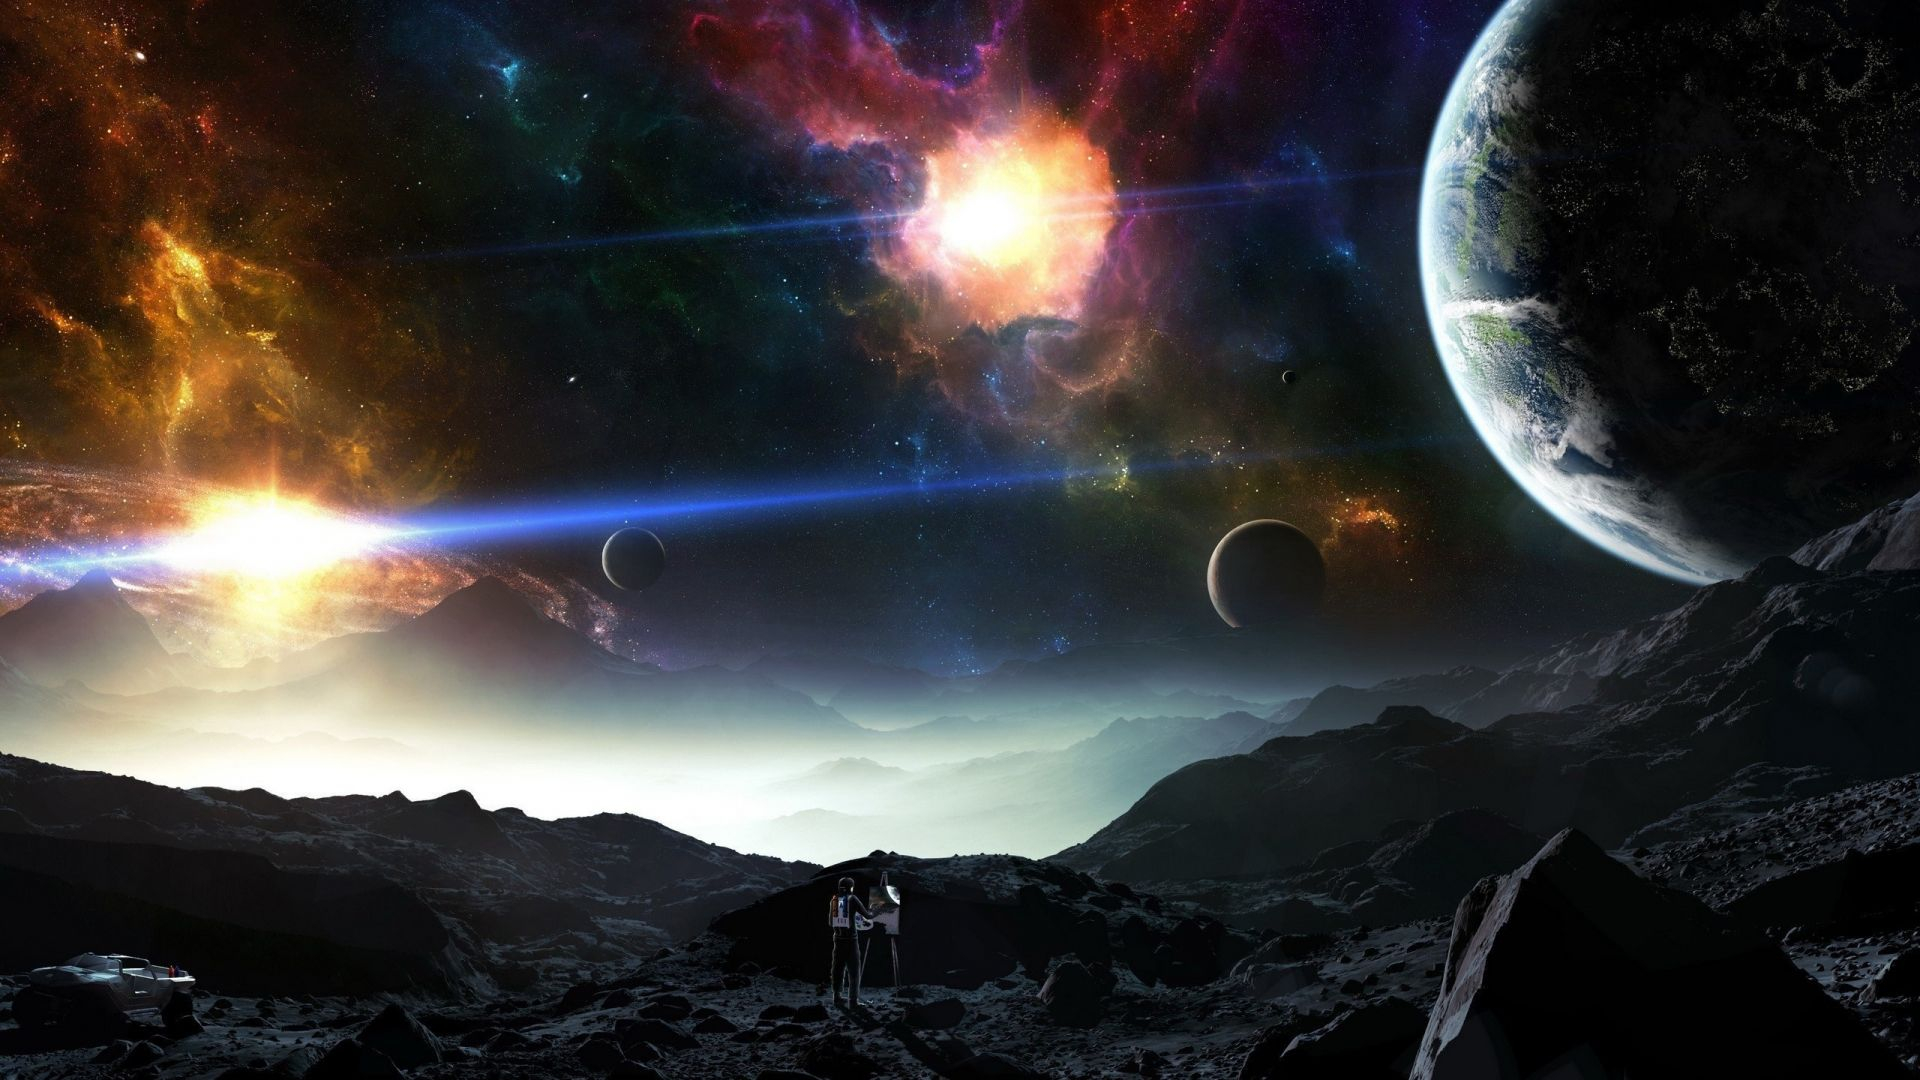 1920x1080 Desktop Wallpaper Fantasy, Space, Planets, Hd Image, Picture, Background, 58b682